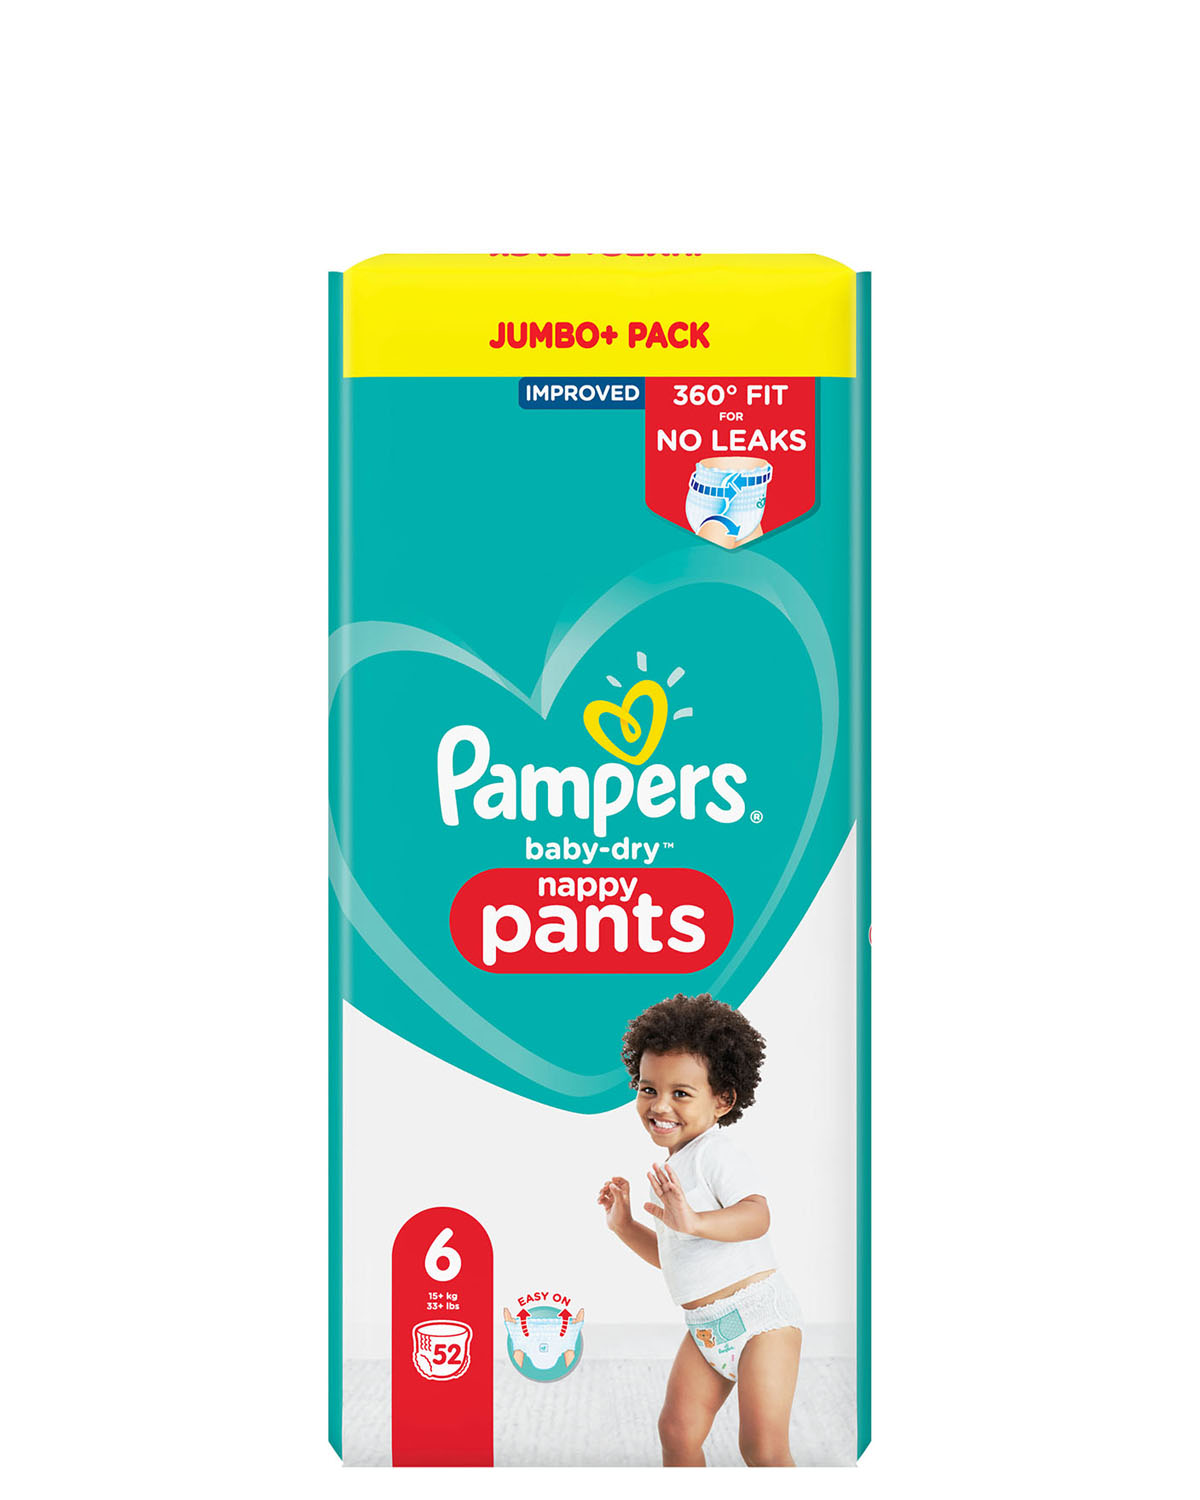 Pampers Baby Dry Pants Jumbo Cube Pack Size: 6 - 52 Nappies